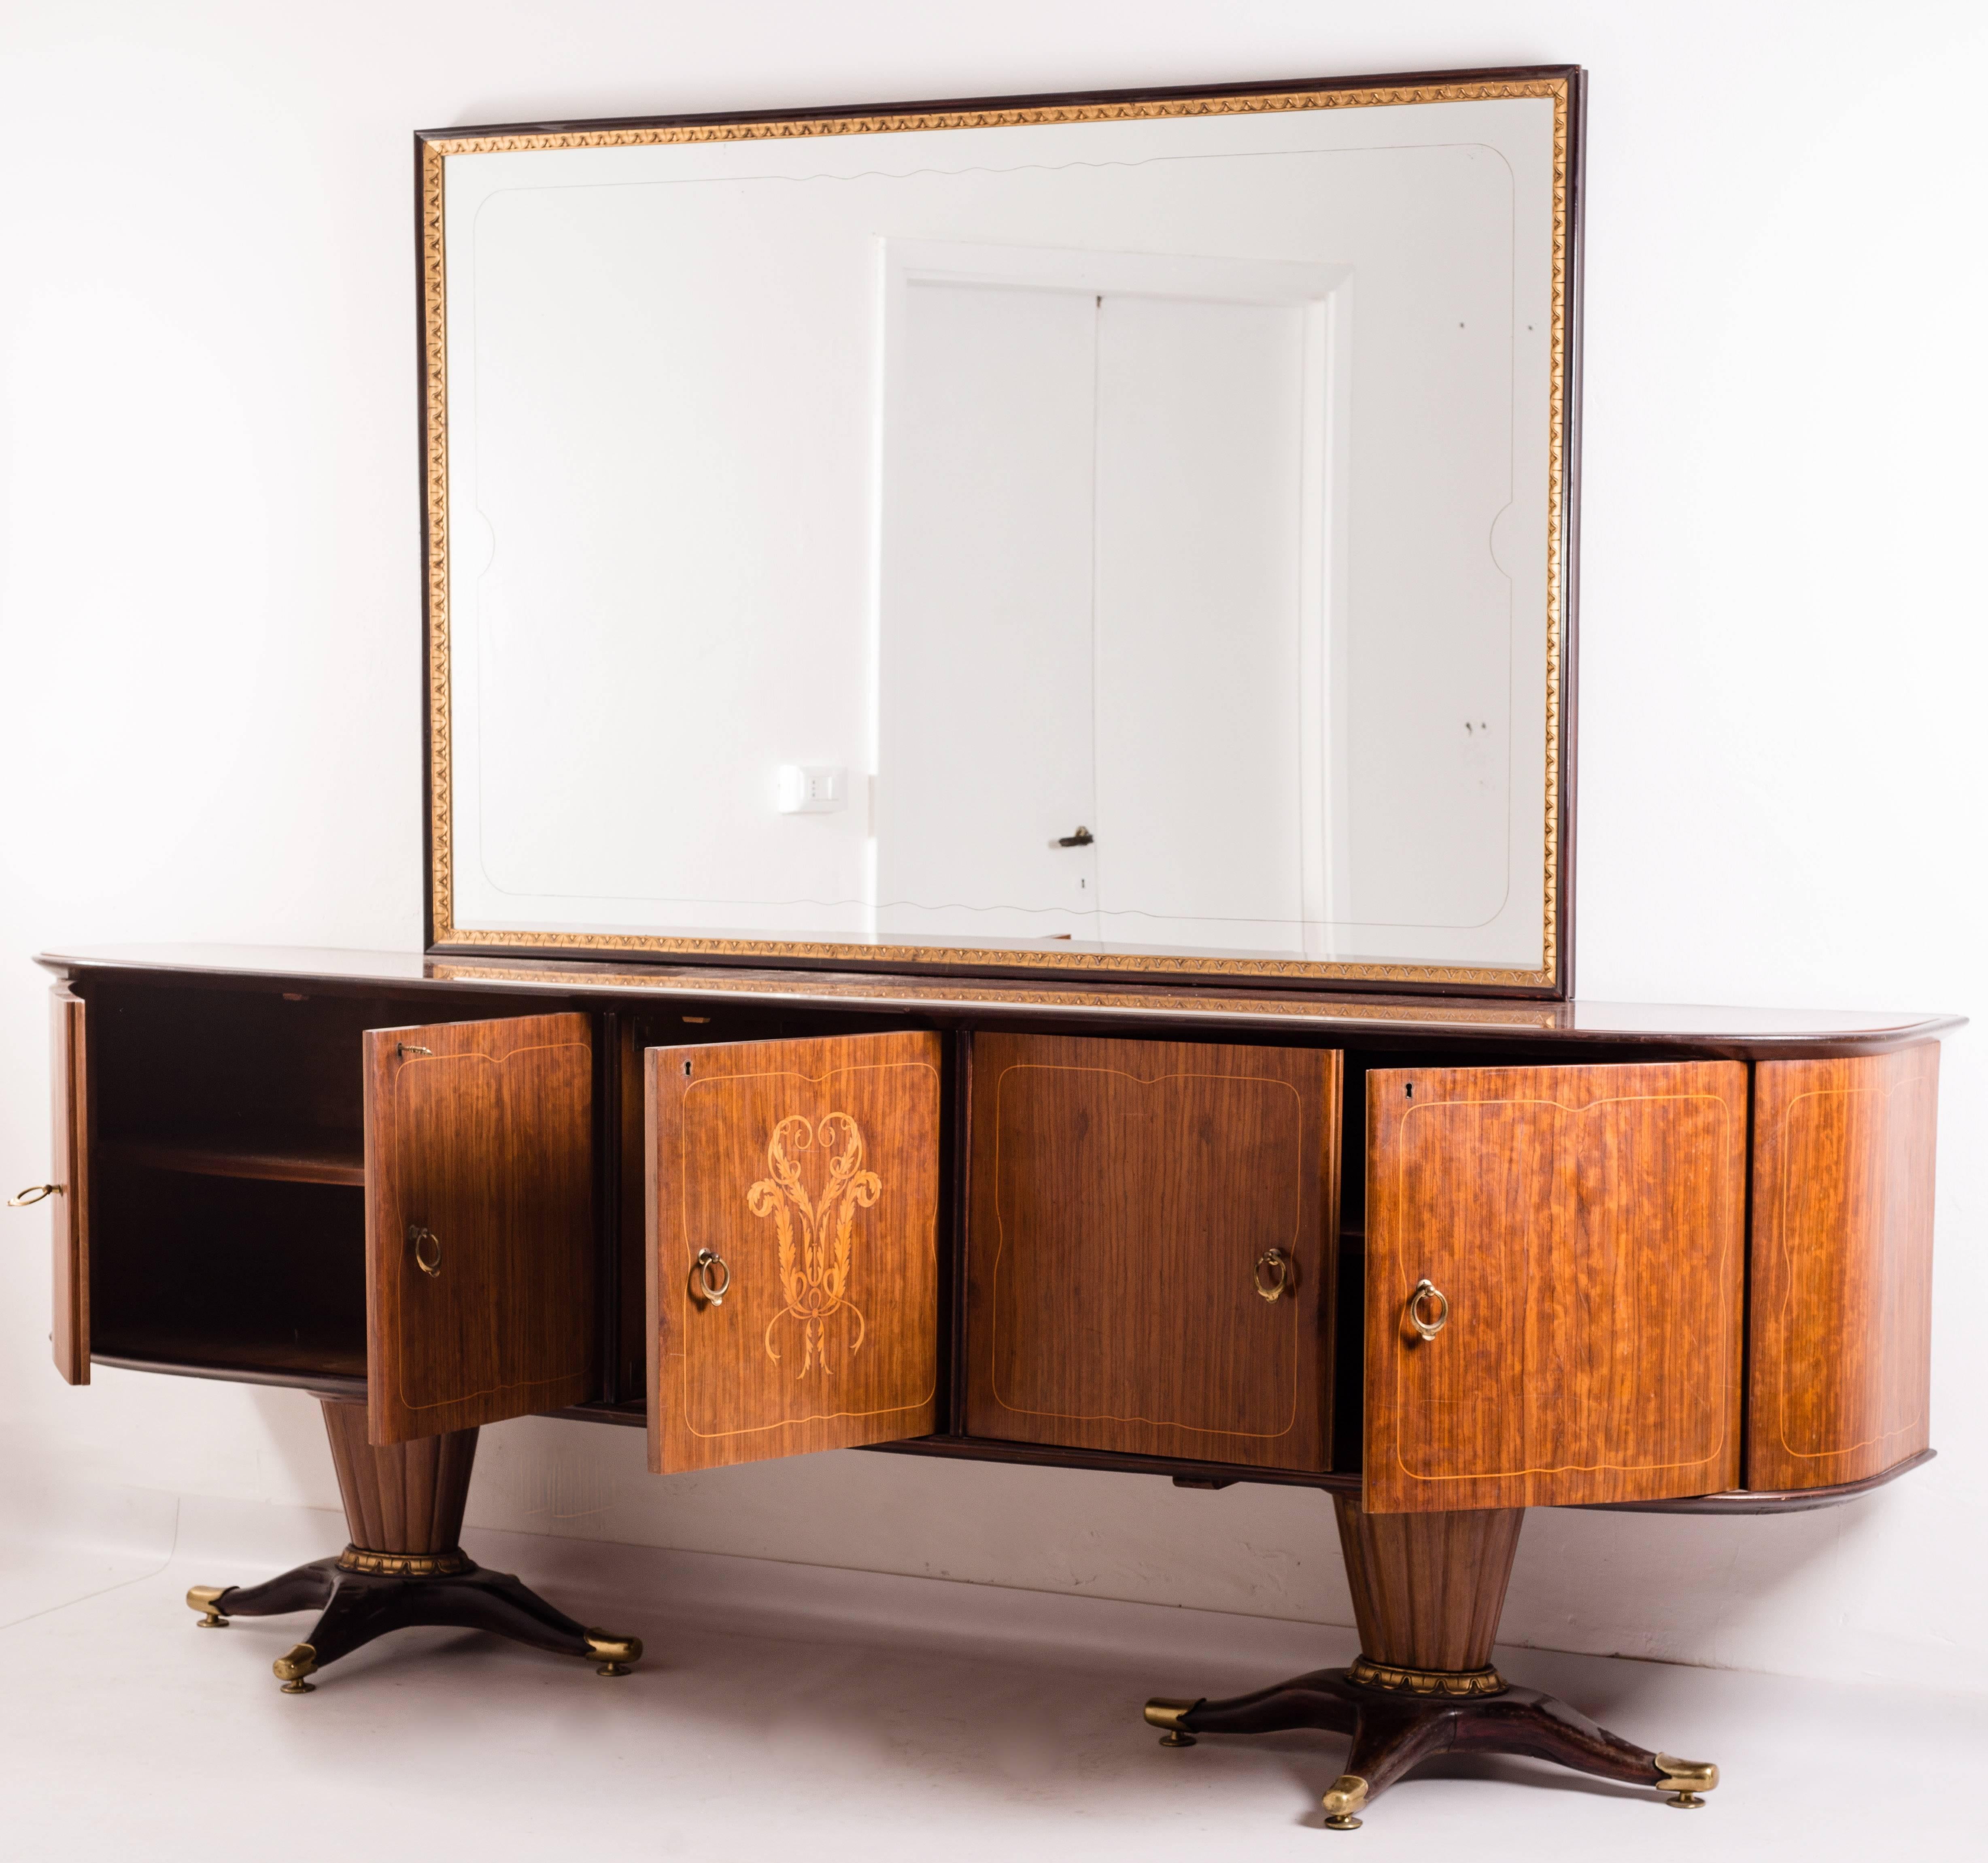 Wood Italian Midcentury Sideboard with Mirror Attributed to Paolo Buffa, 1950s For Sale